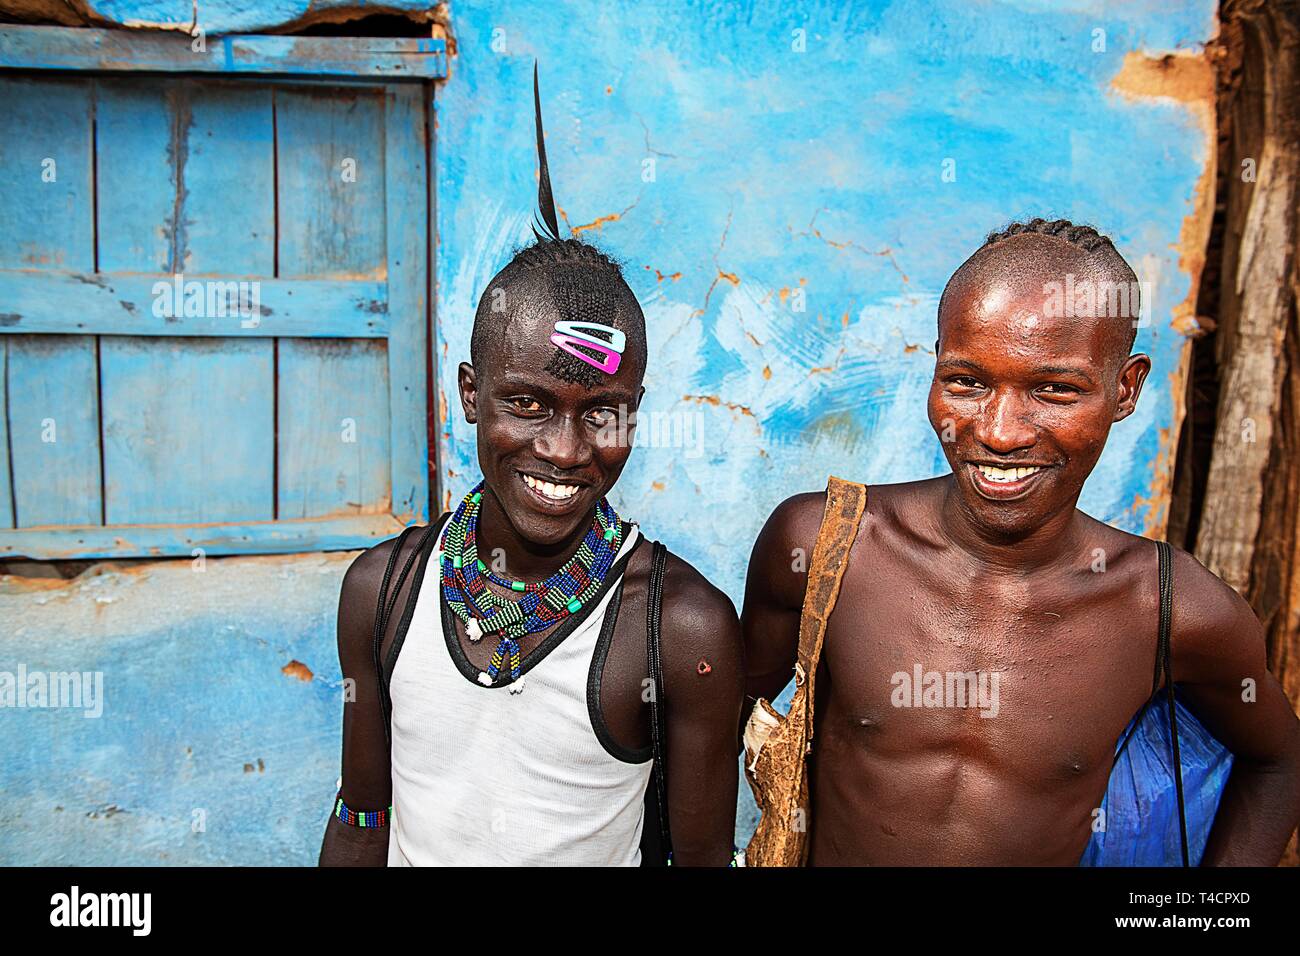 Laughing young men of the Hamer ethnic group with colorful hair clips and pearl jewelry, Dimeka, Lower Omo Valley, Omo region, South Ethiopia Stock Photo